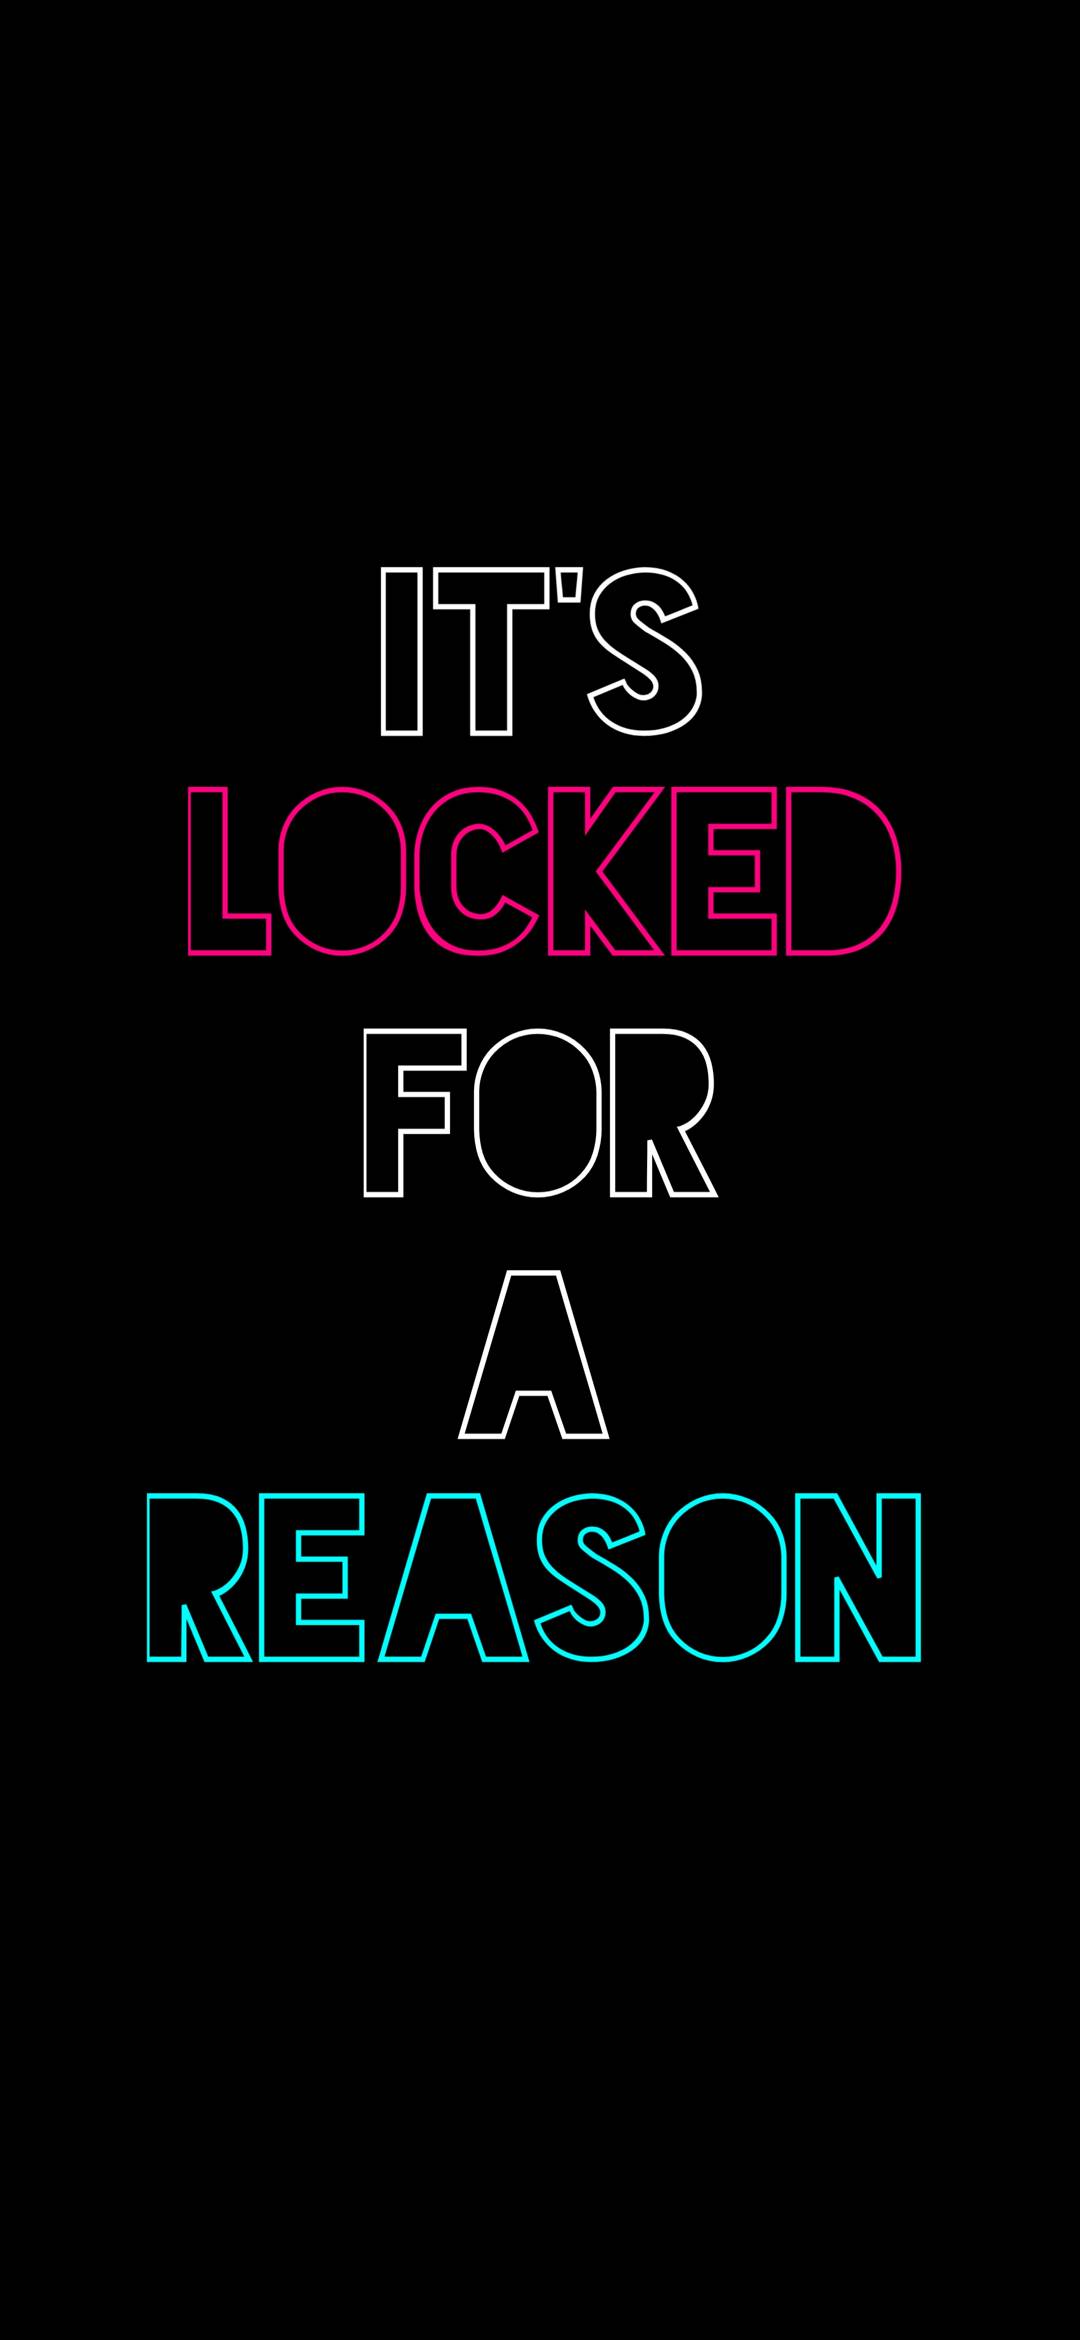 Locked for Reason Text Wallpaper 1080x2340